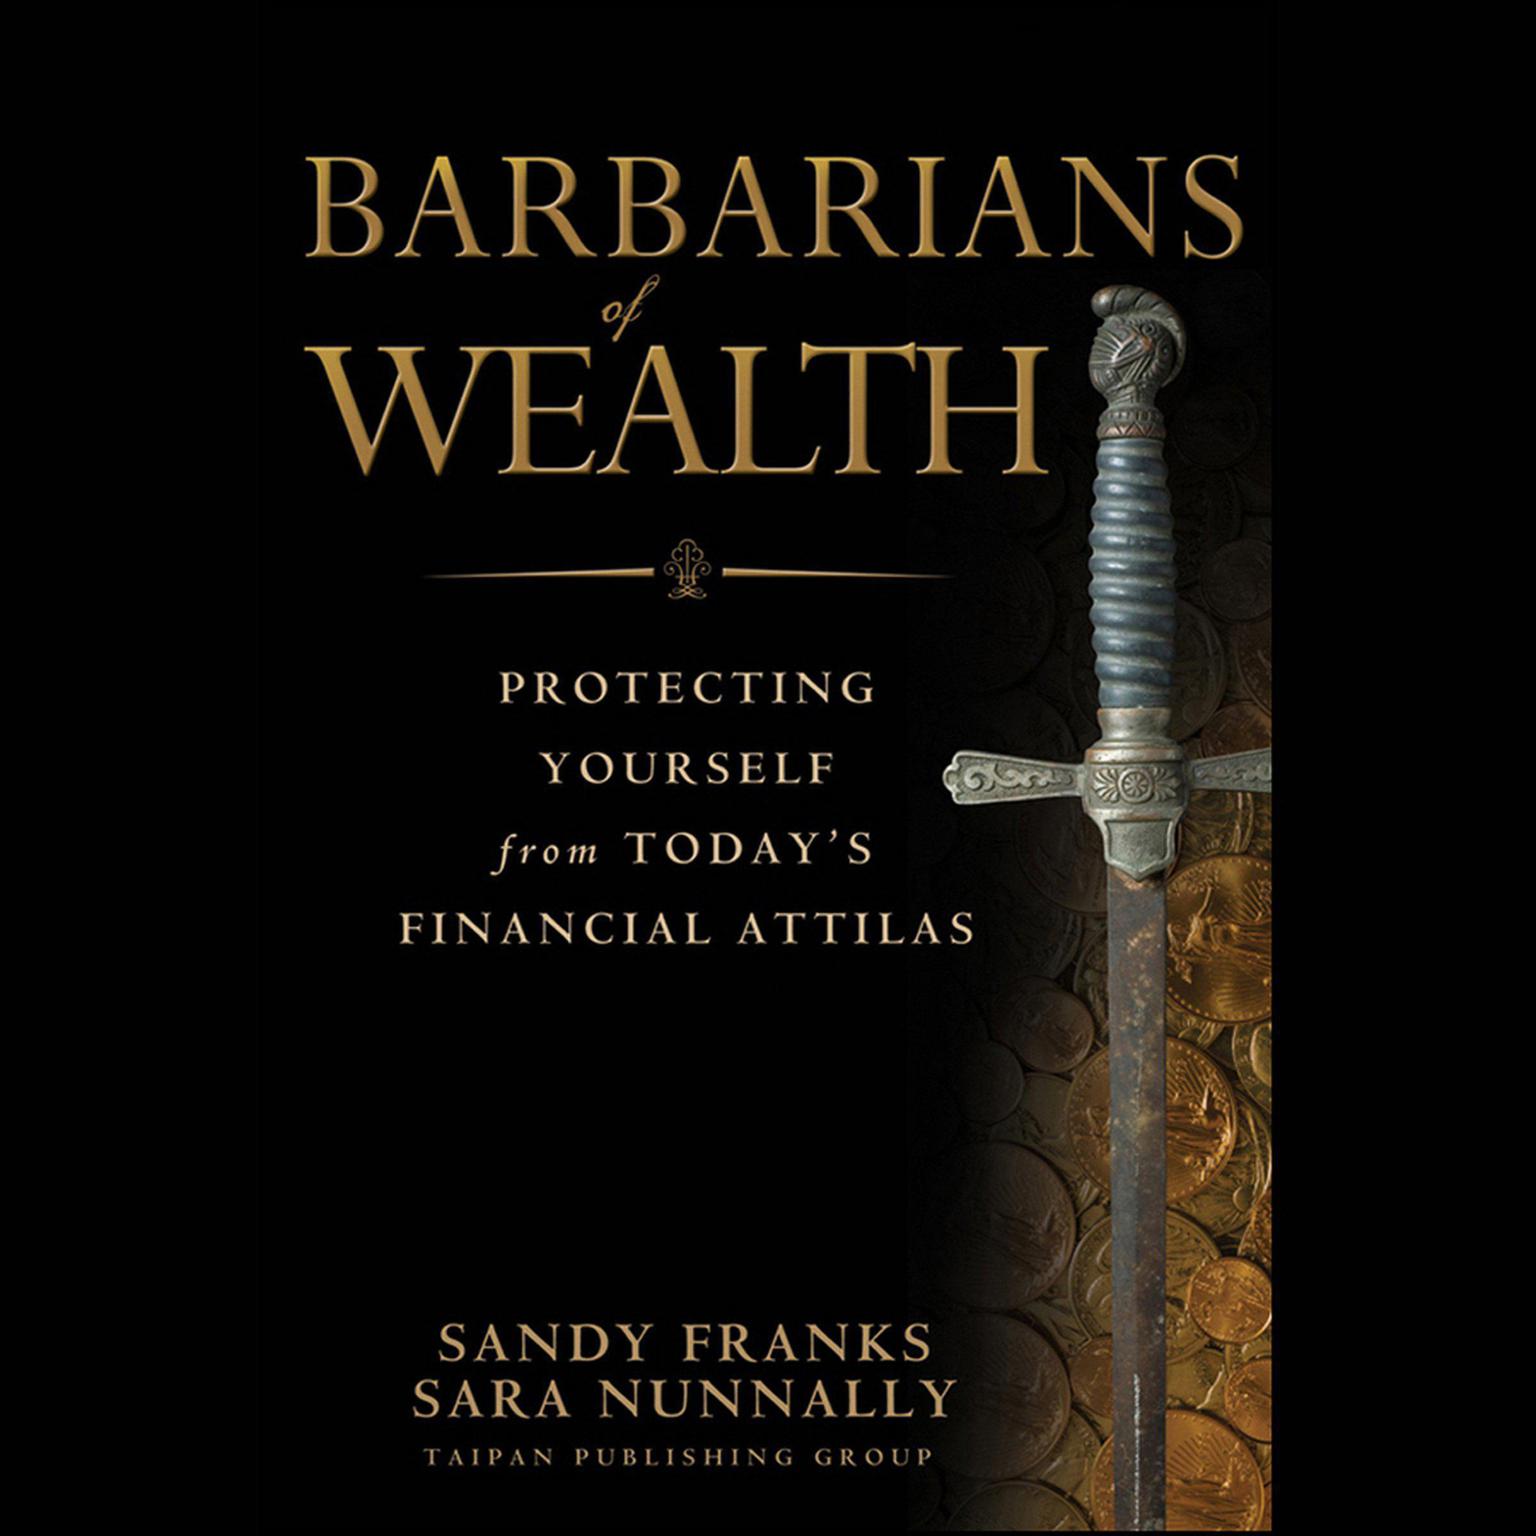 Barbarians of Wealth: Protecting Yourself from Todays Financial Attilas Audiobook, by Sandy Franks